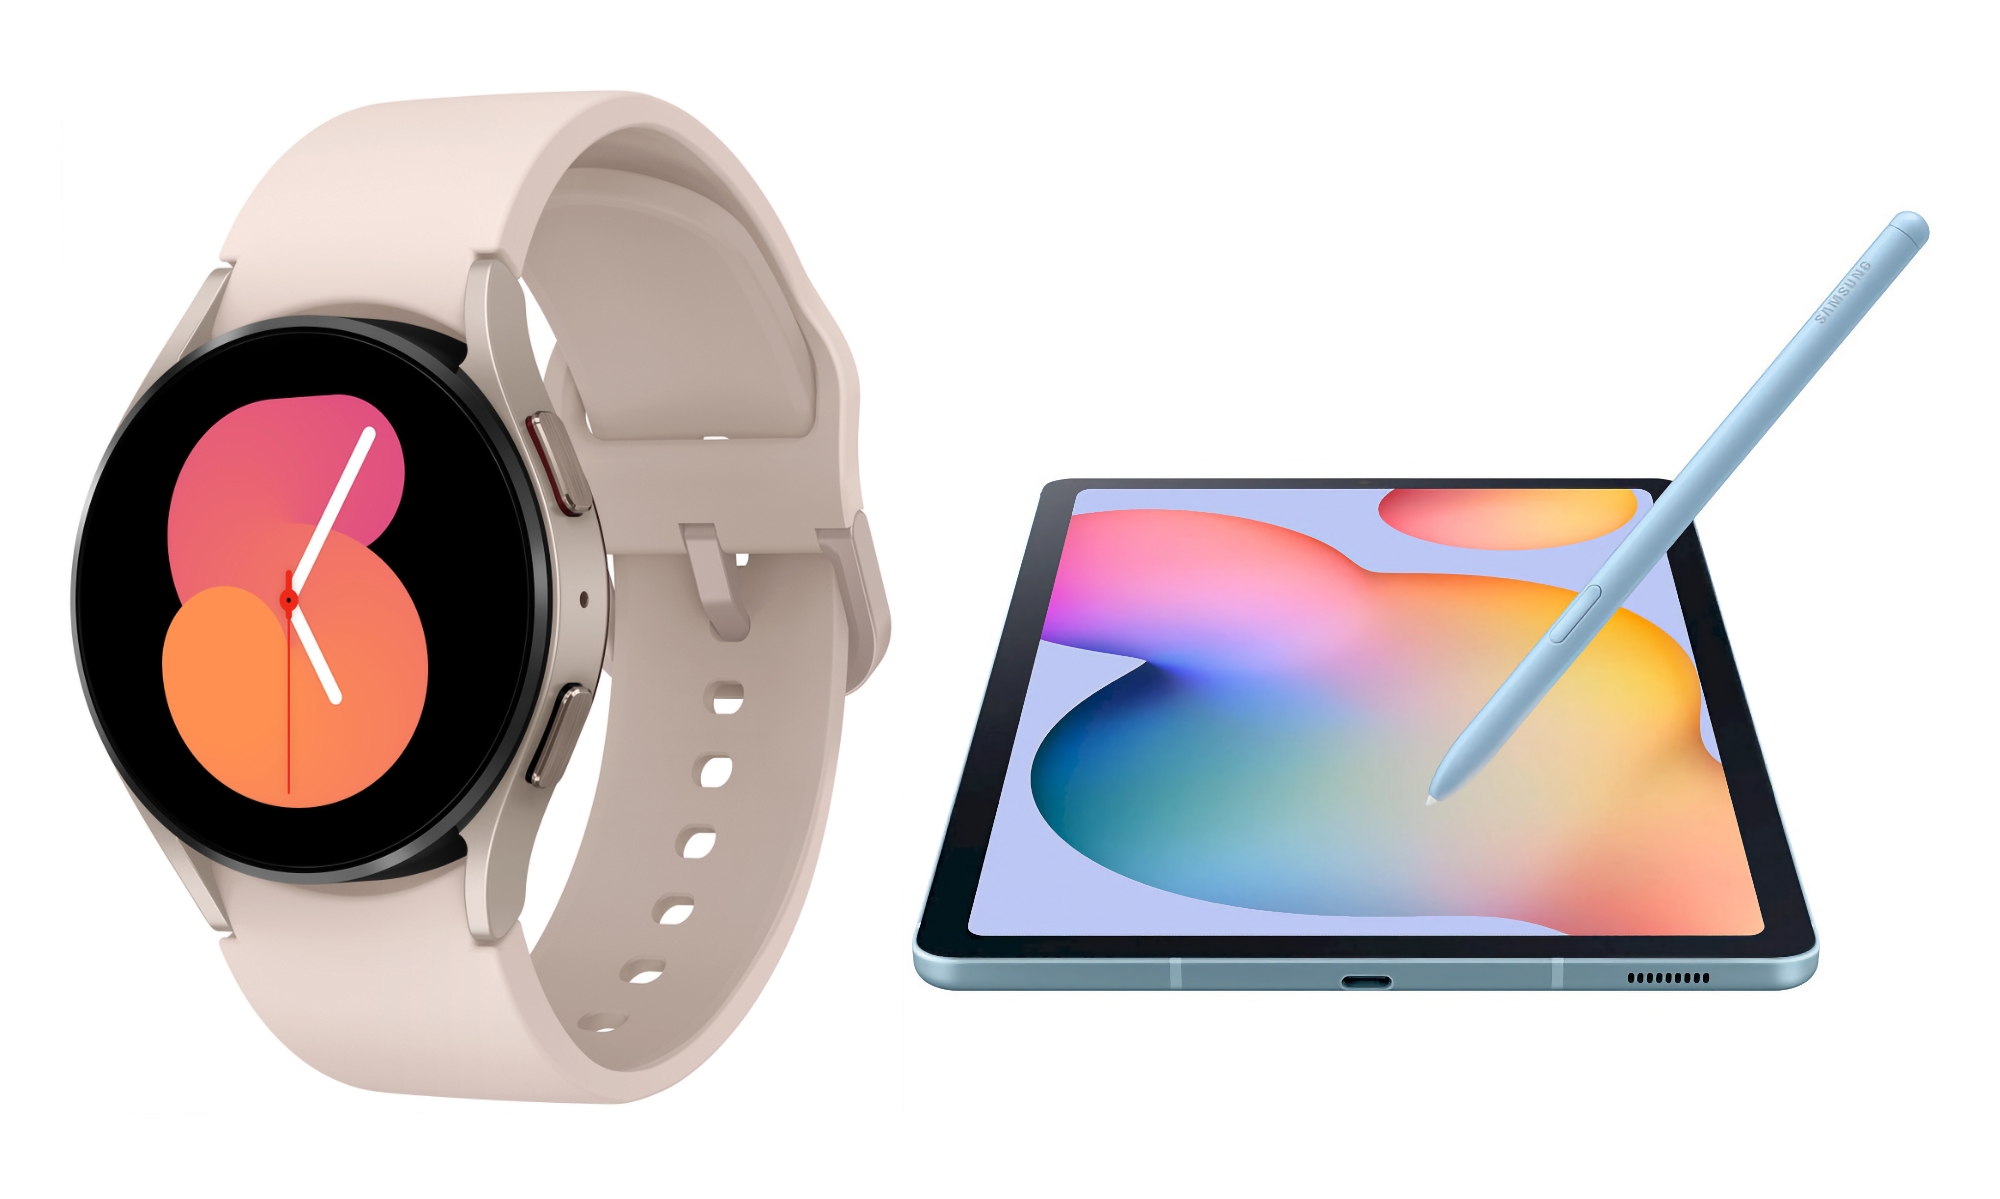 Insider: Samsung will release an updated Galaxy Watch 4 smartwatch and Galaxy Tab S6 Lite tablet this year